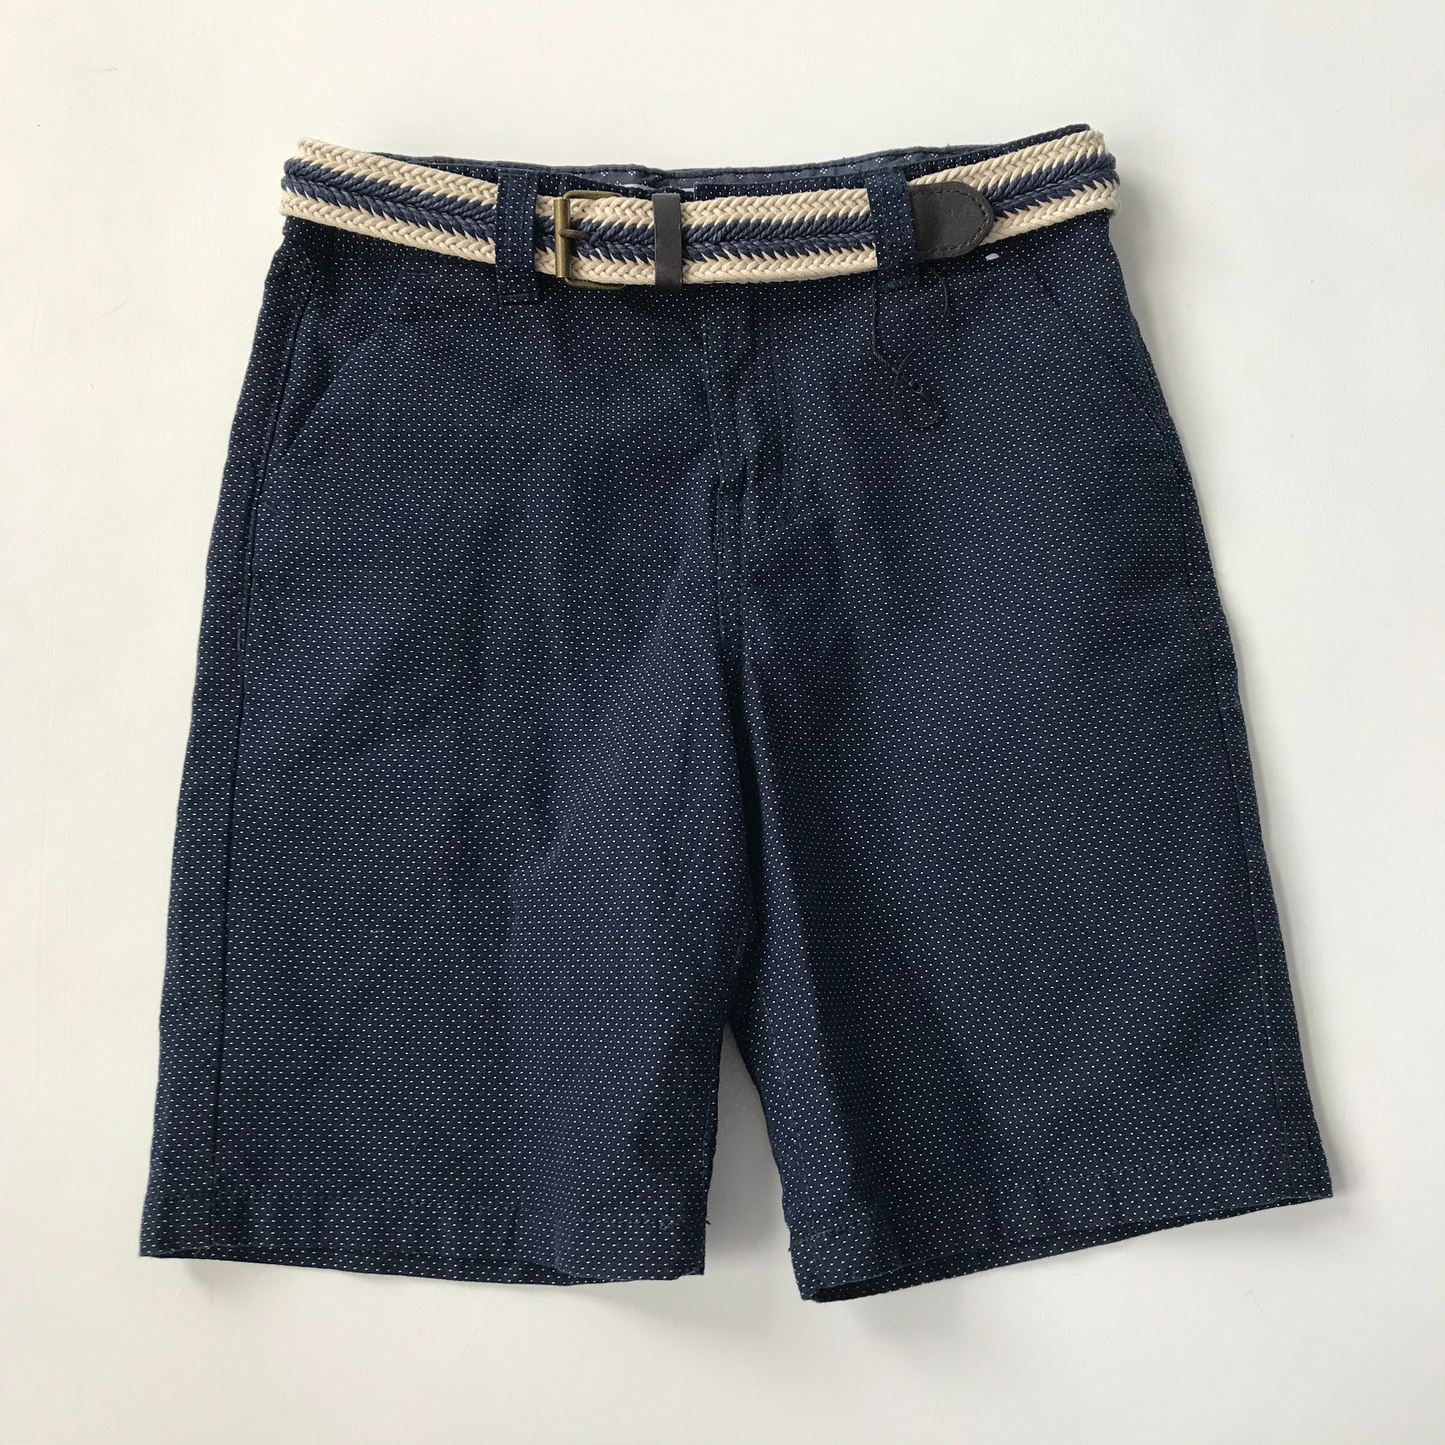 Shorts - Navy with Belt - Age 9